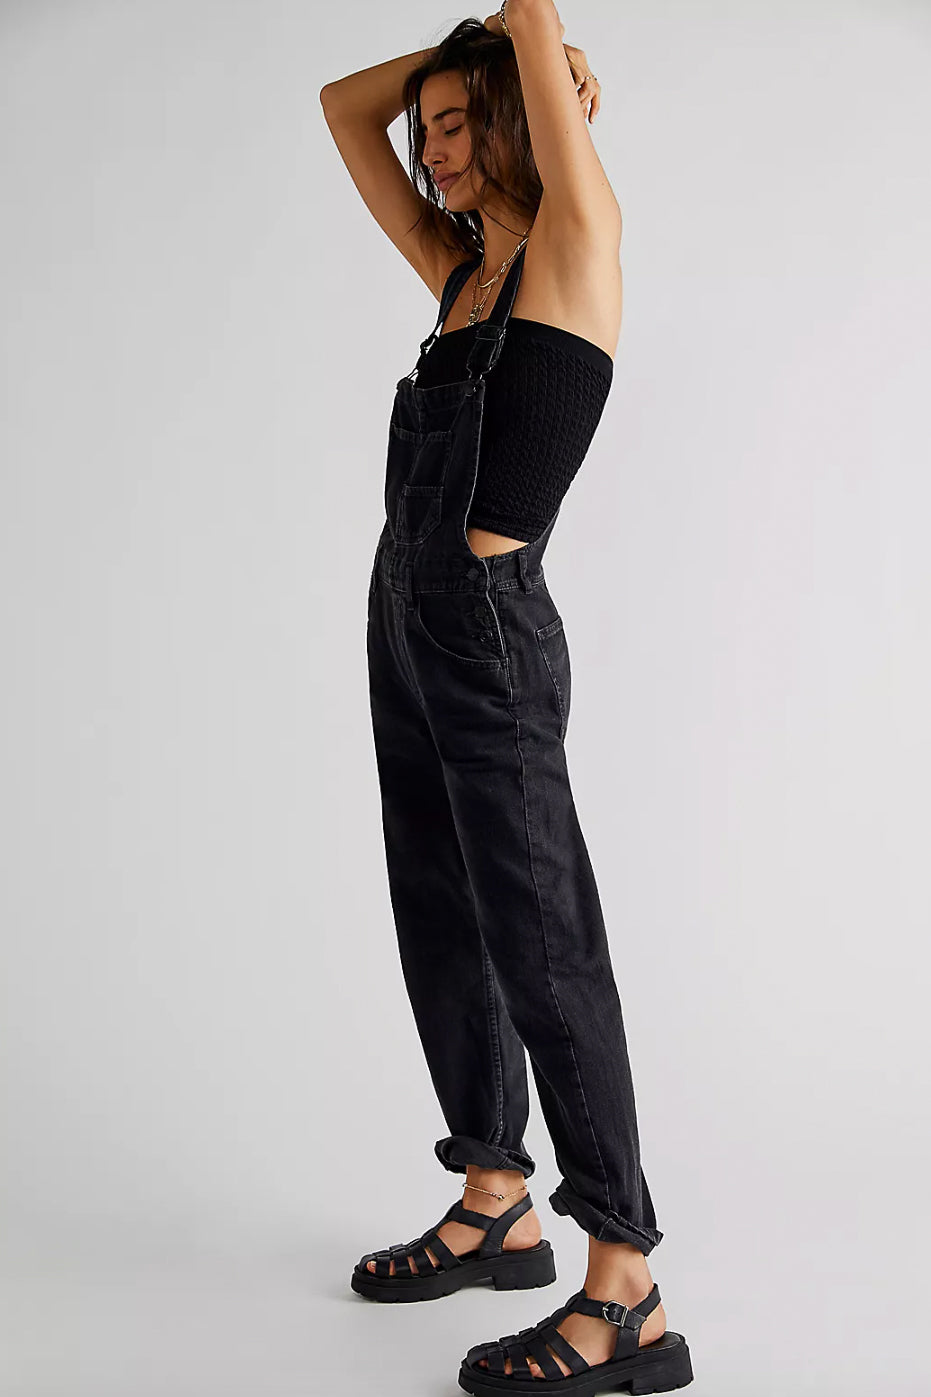 Ziggy Denim Overall - Mineral Black - The Canyon